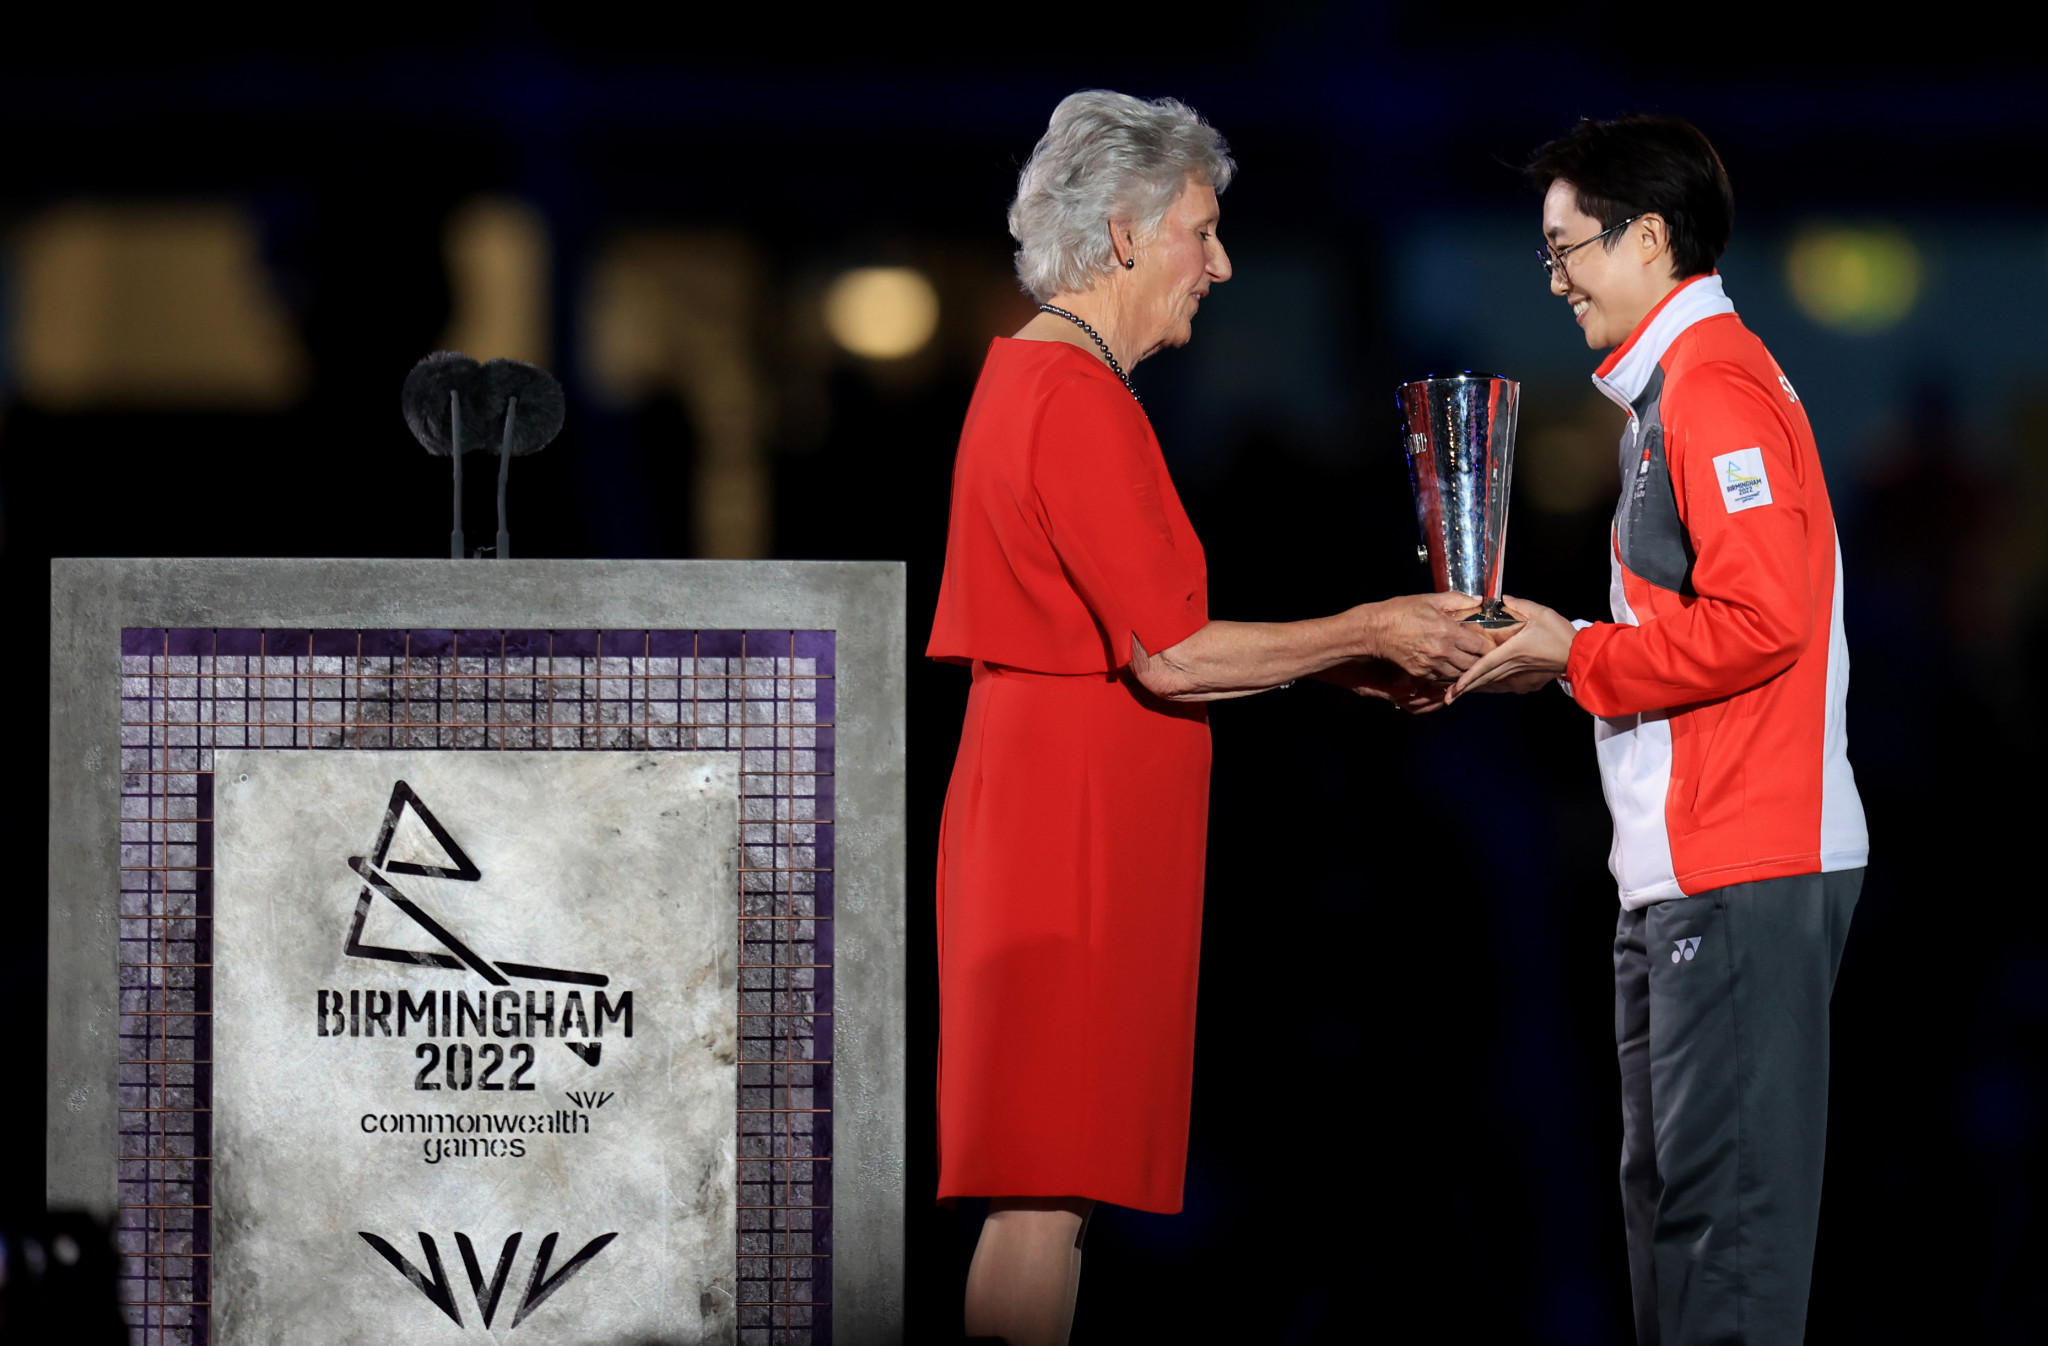 CGF President Dame Louise Martin presented the David Dixon Award to Feng Tianwei ©Getty Images